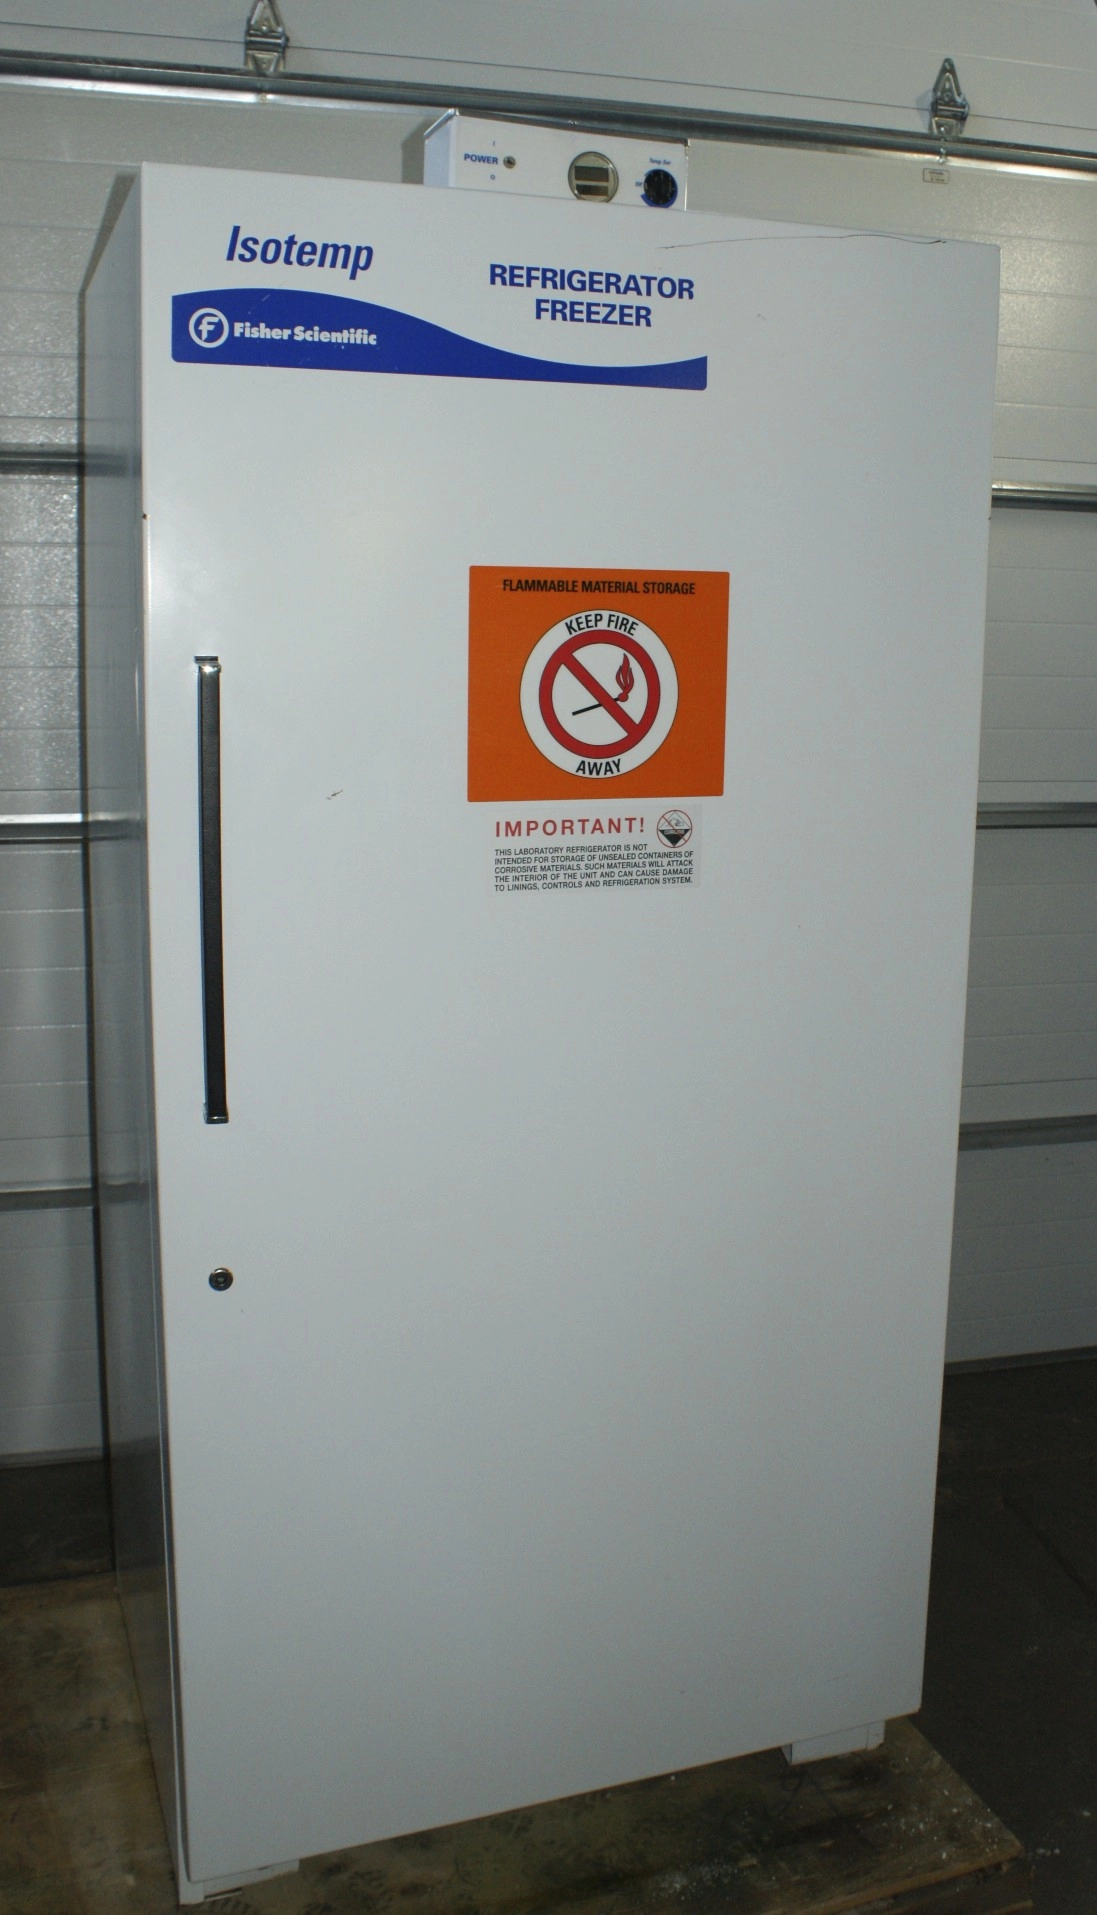 LabRepCo 4 Cu. Ft. Undercounter Flammable Material Storage Freezer